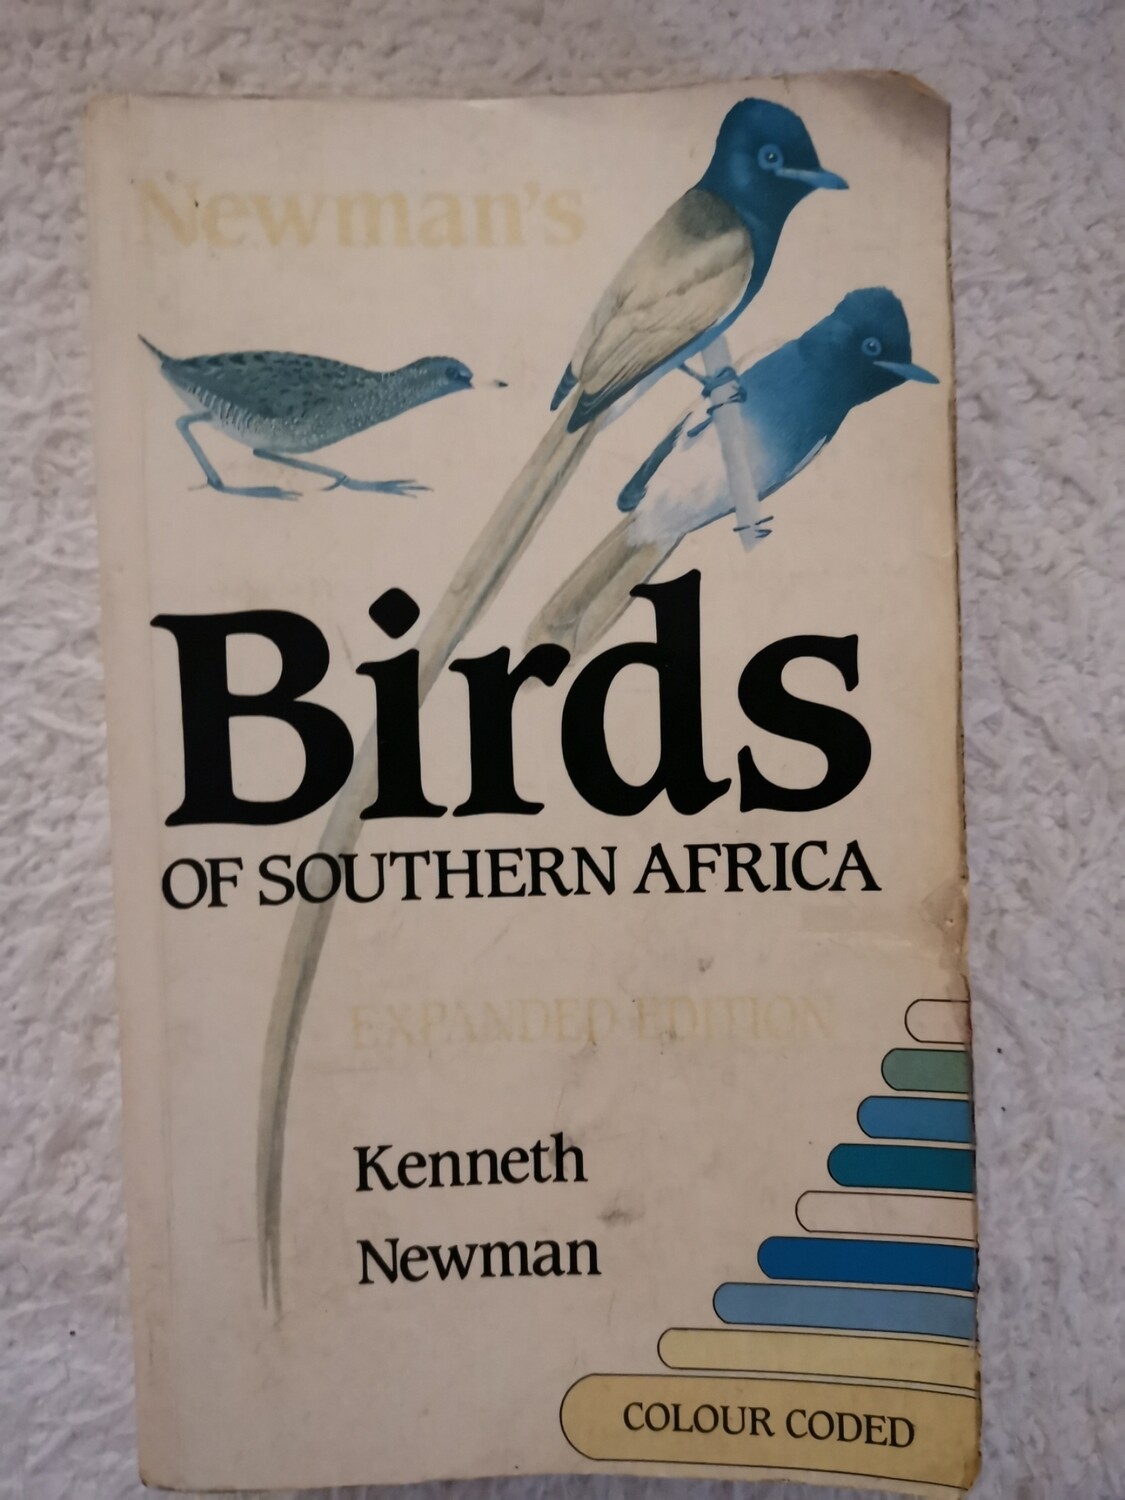 Birds of Southern Africa, Kenneth Newman